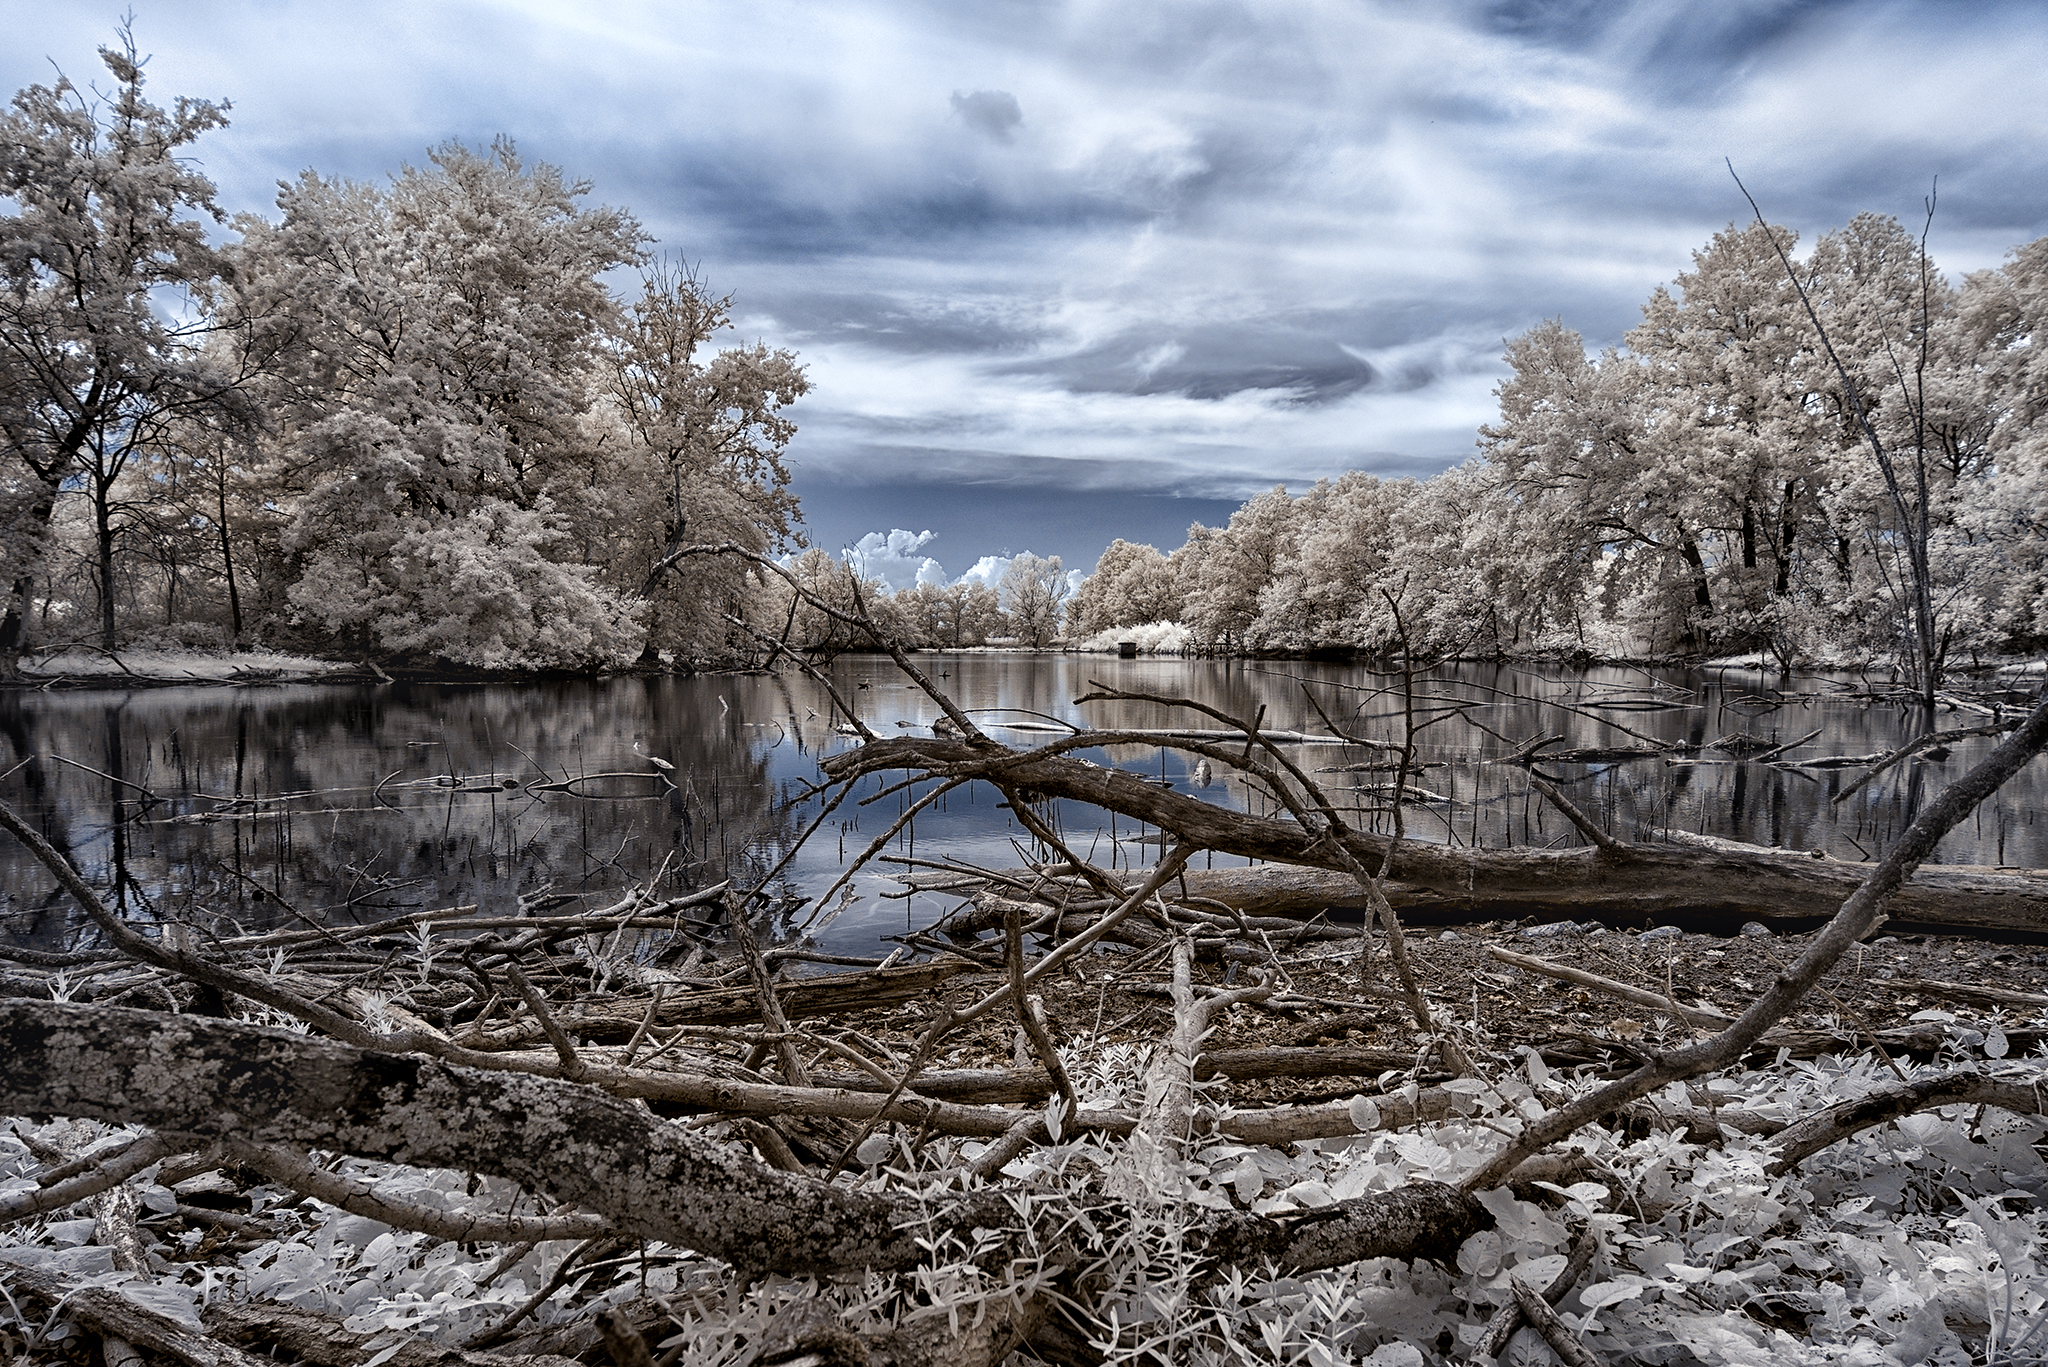 Infrared Vision. Infrared photography performed with N...